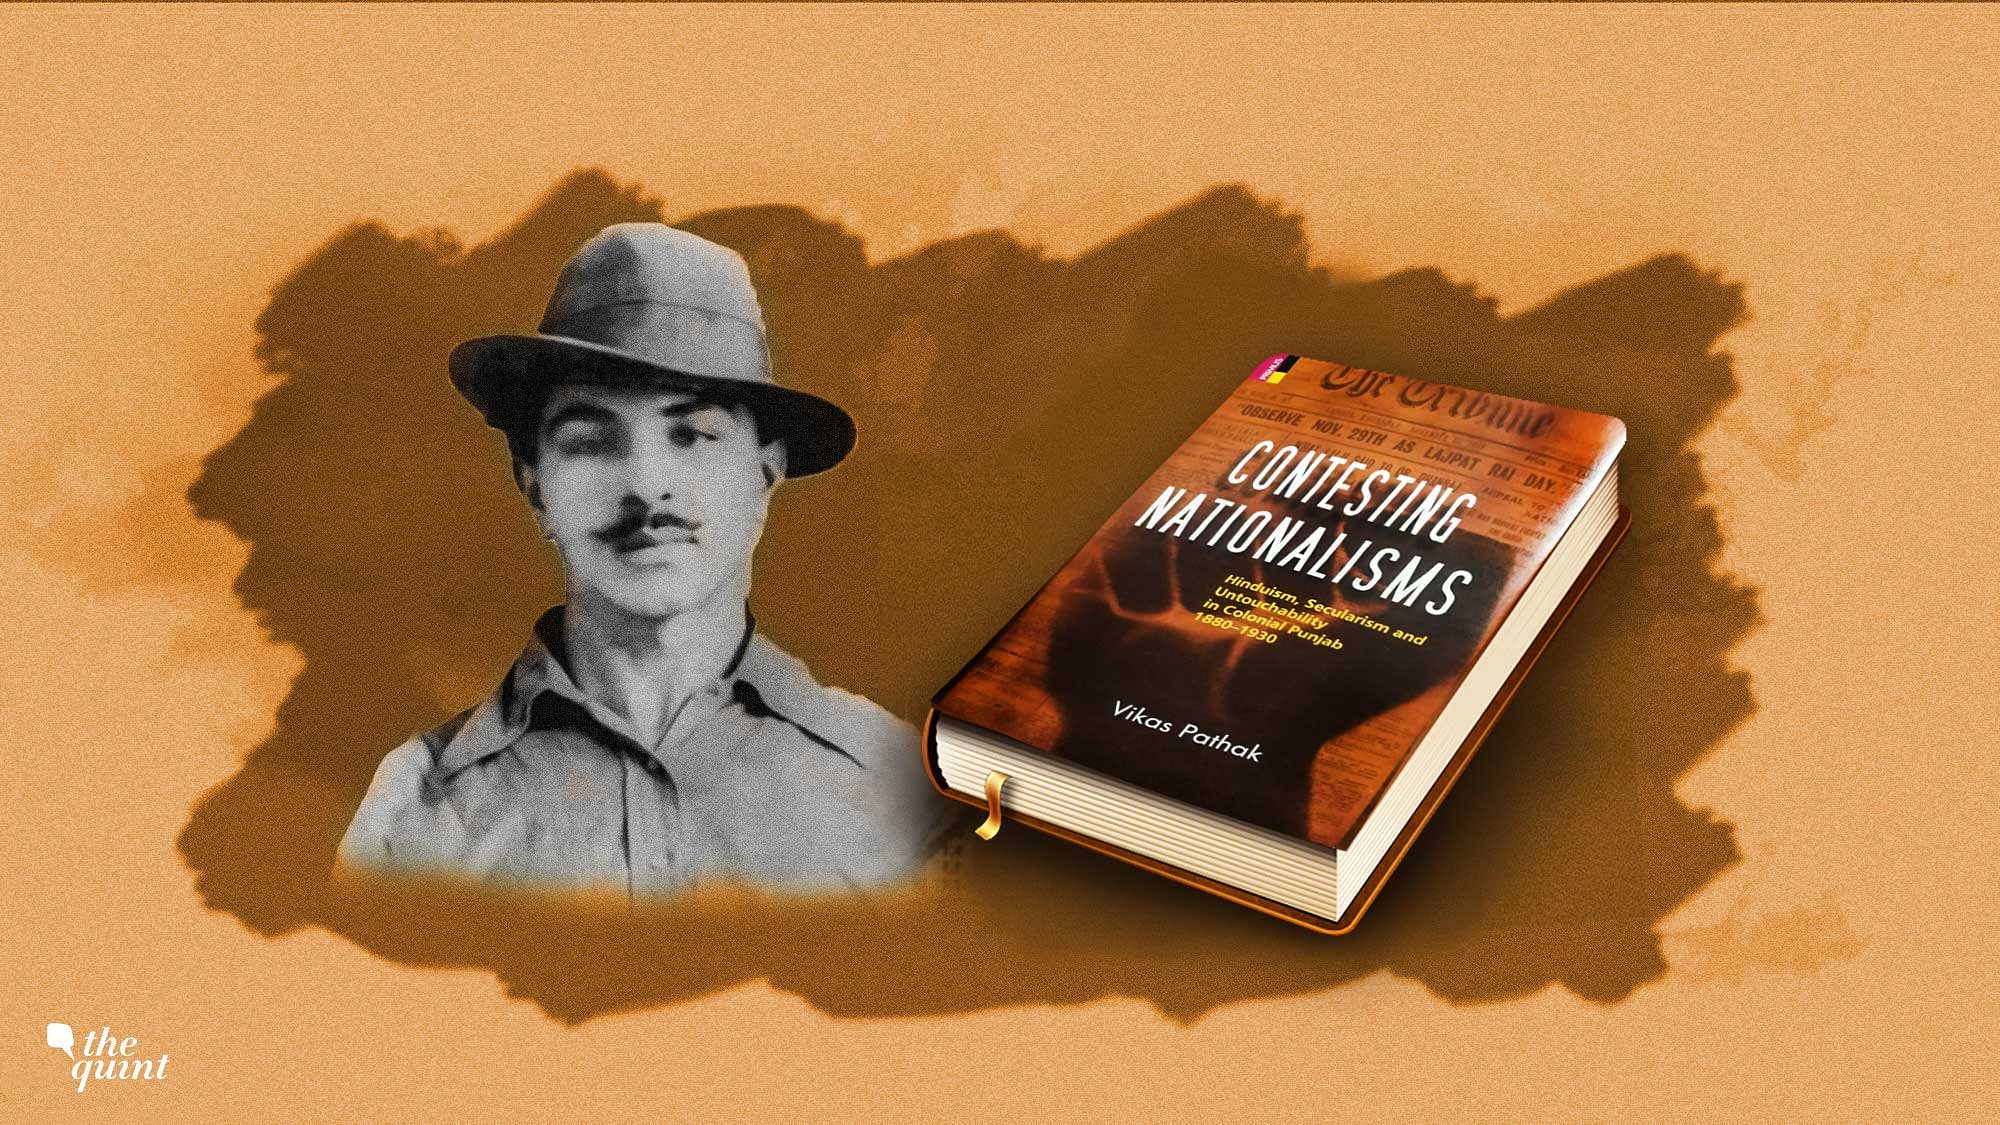 Image of Bhagat Singh and the cover of the book by Dr Vikas Pathak.&nbsp;